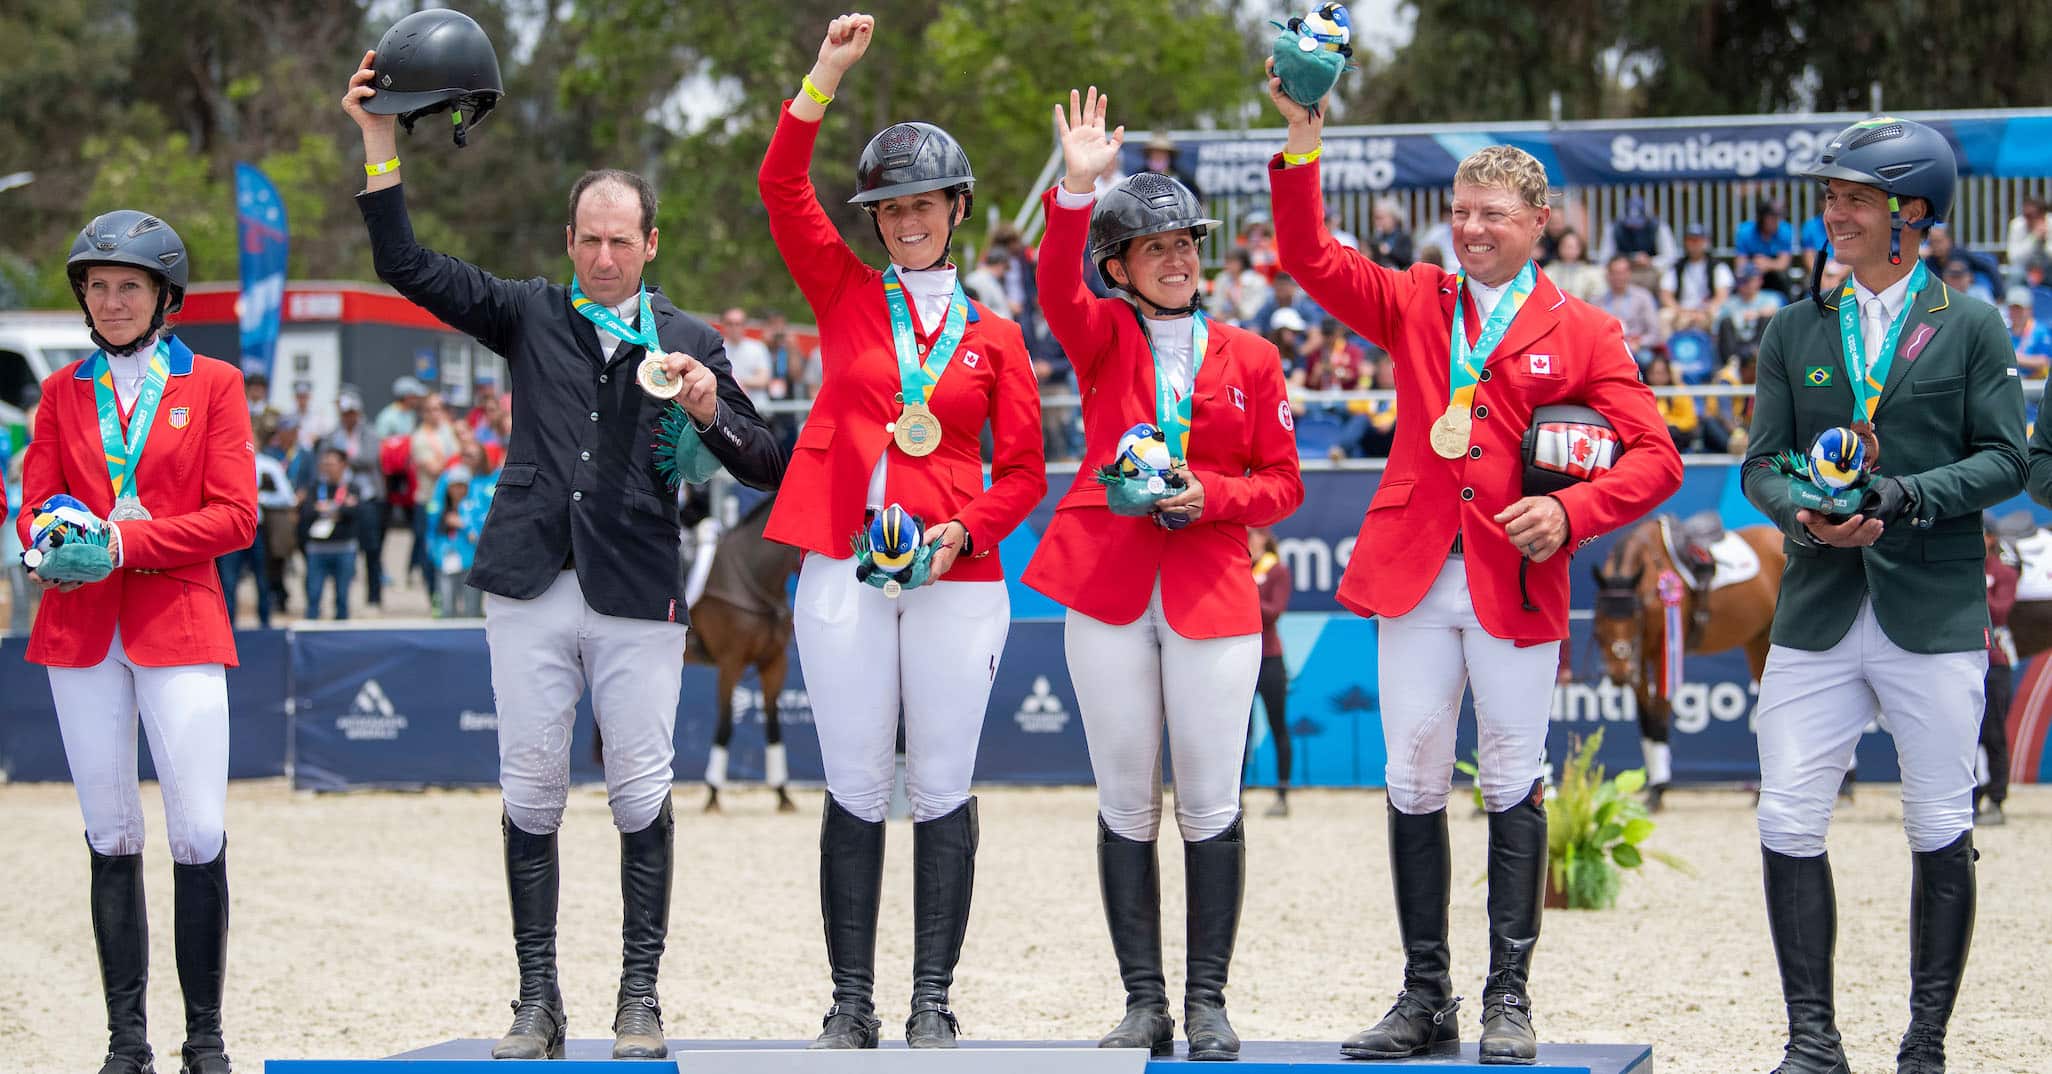 The Canadian eventing team on the podium in Chile.